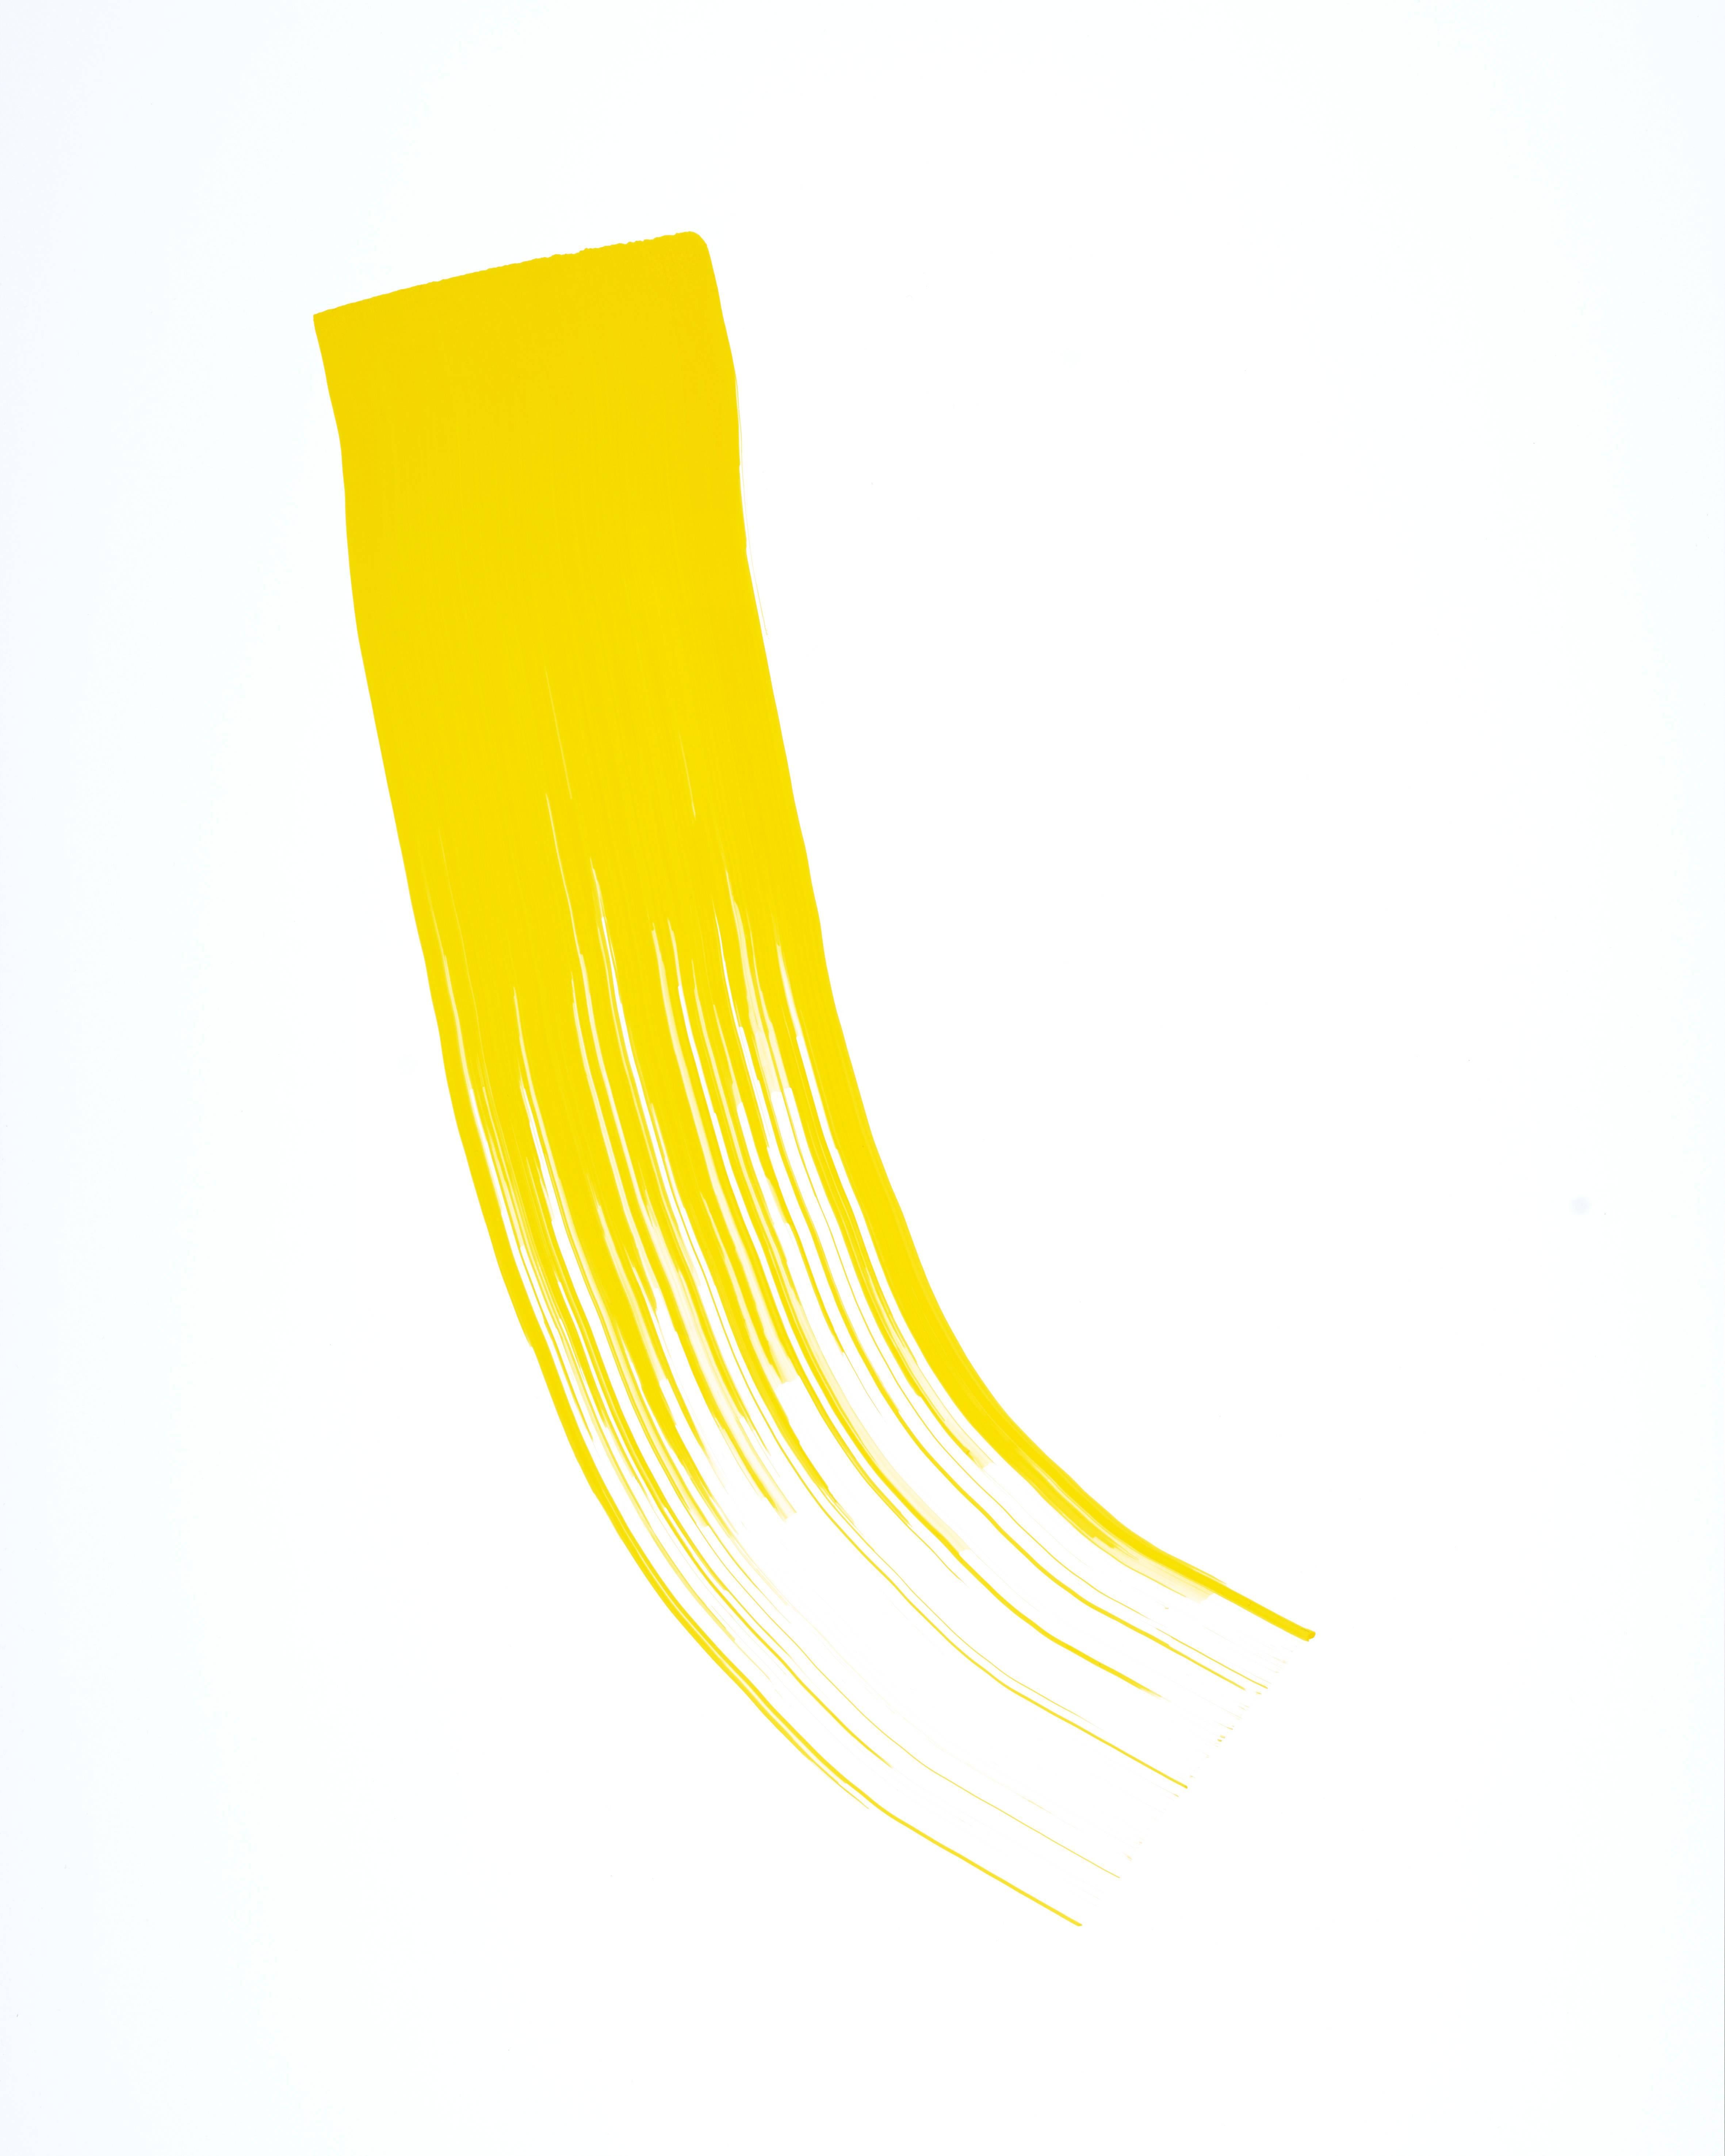 Edition of Yellow Work - Art by Phil Chang